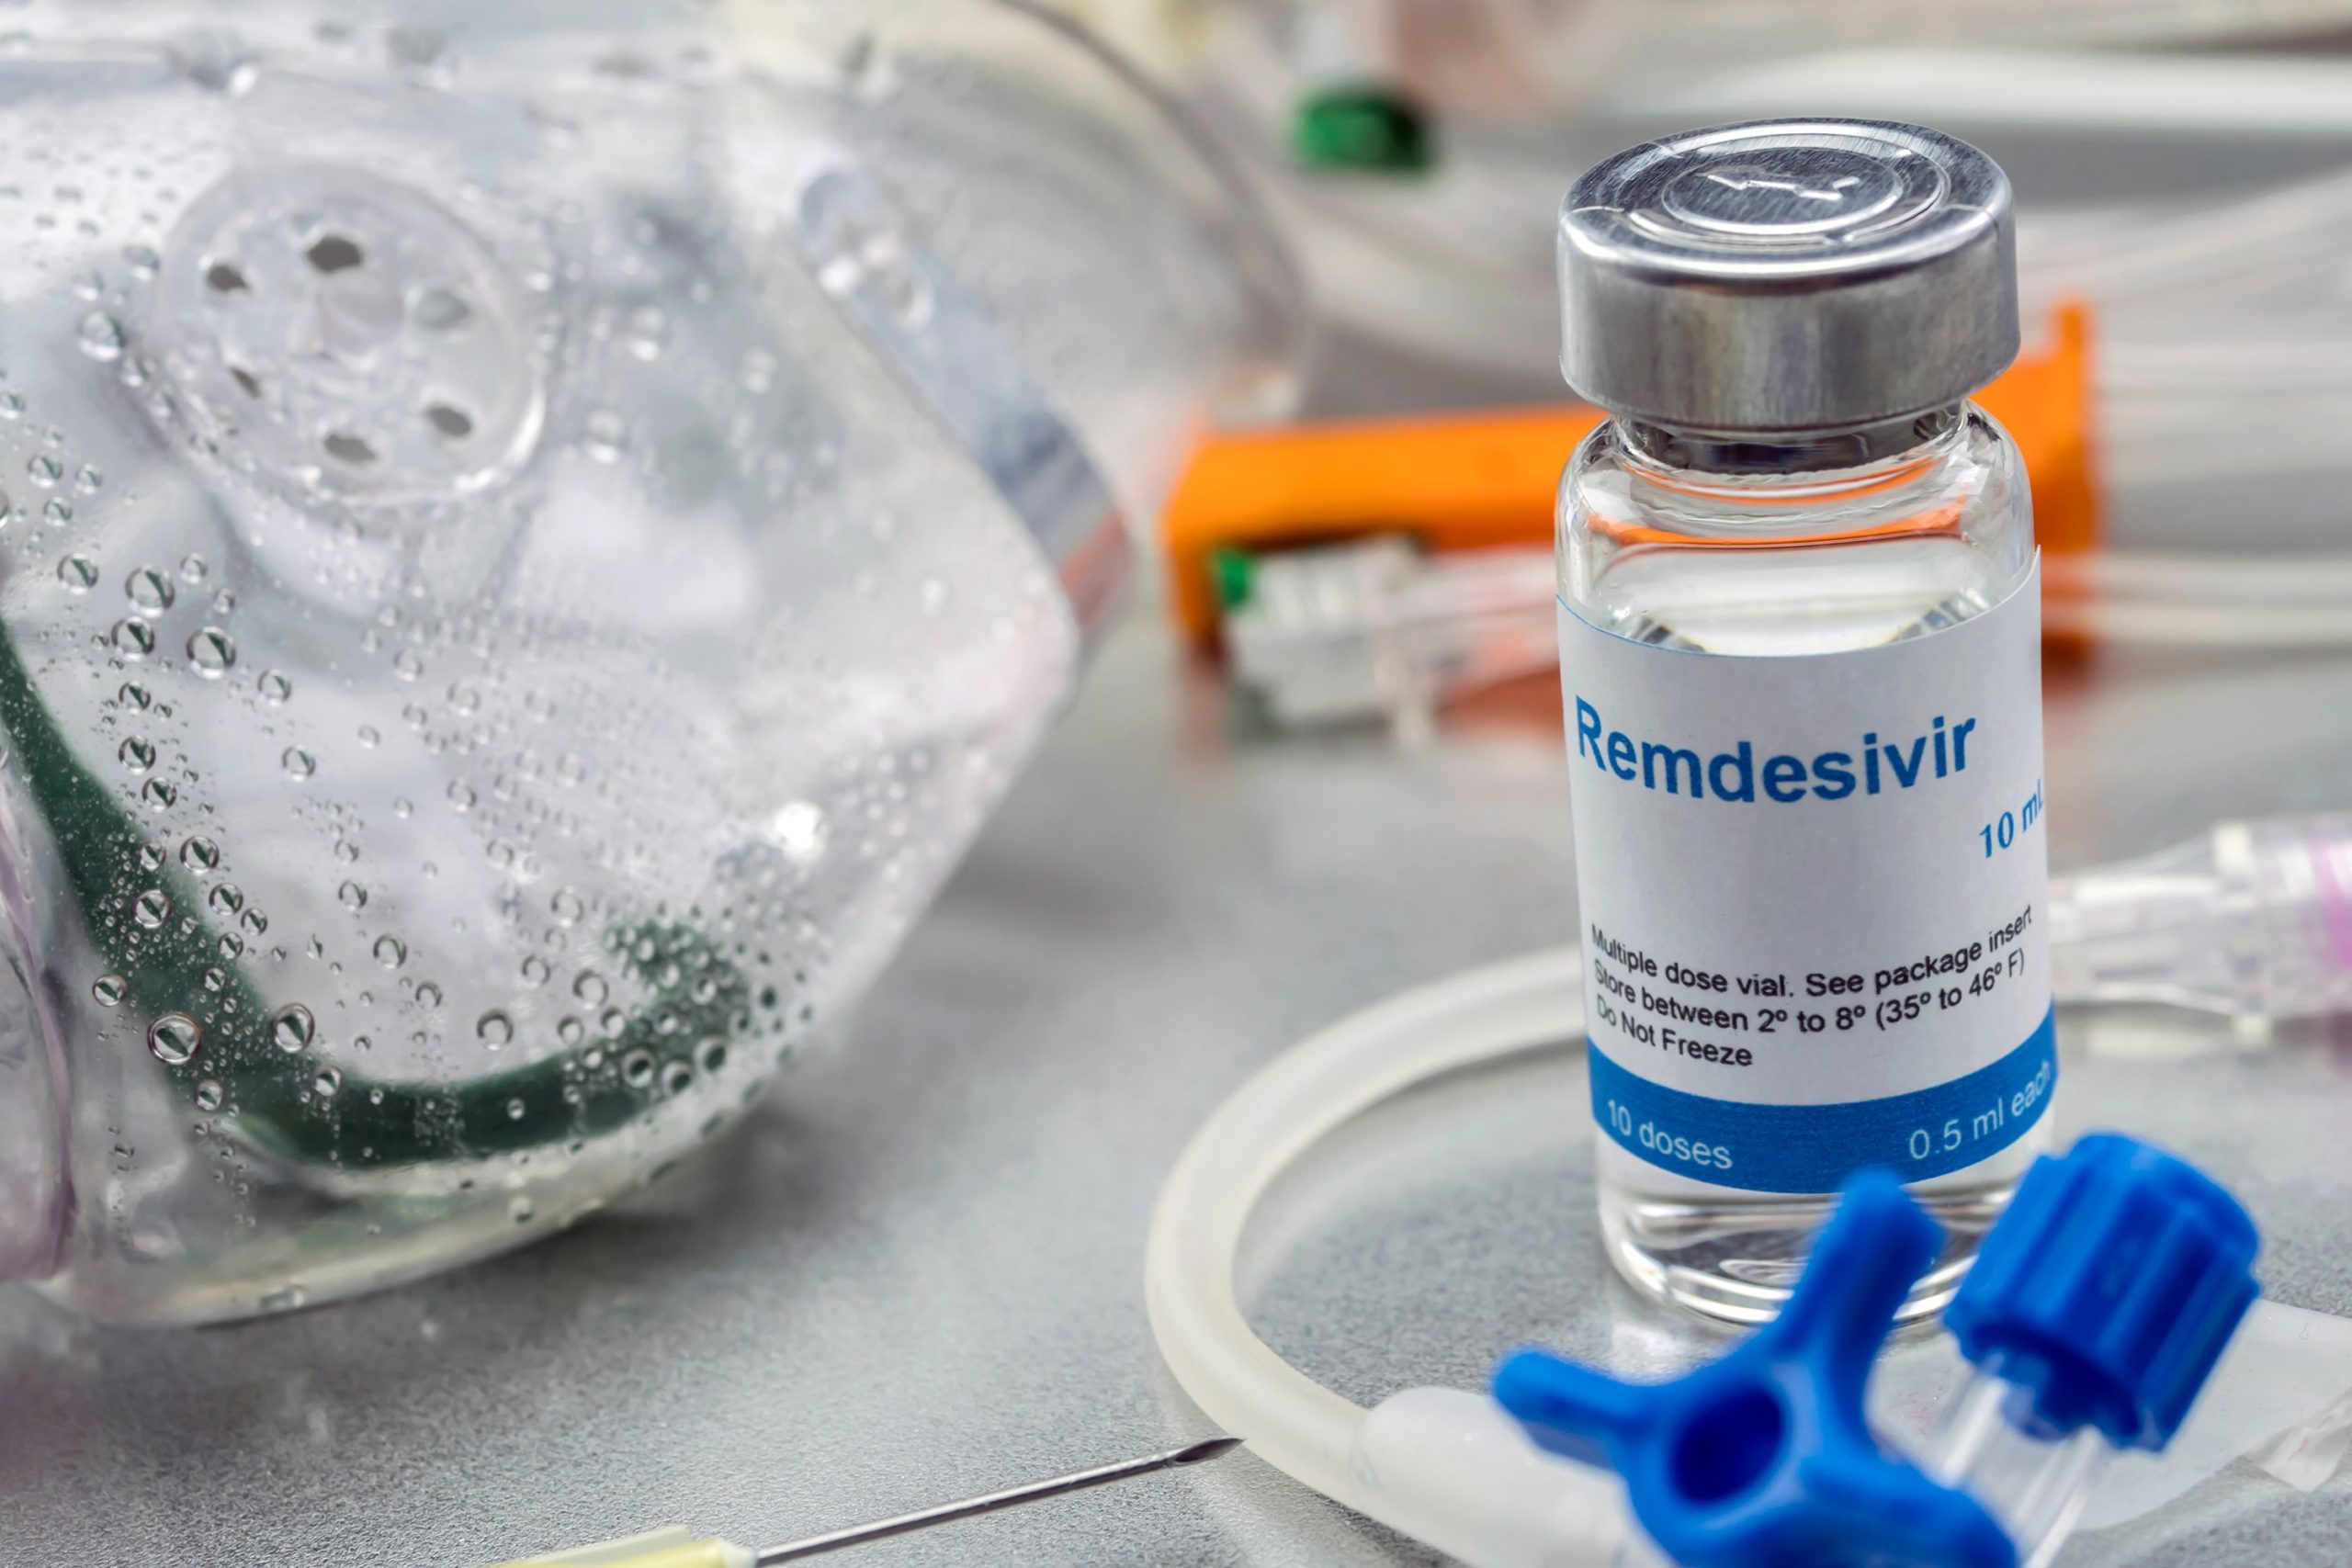 Get to know Remdesivir, an antiviral drug used to treat COVID-19